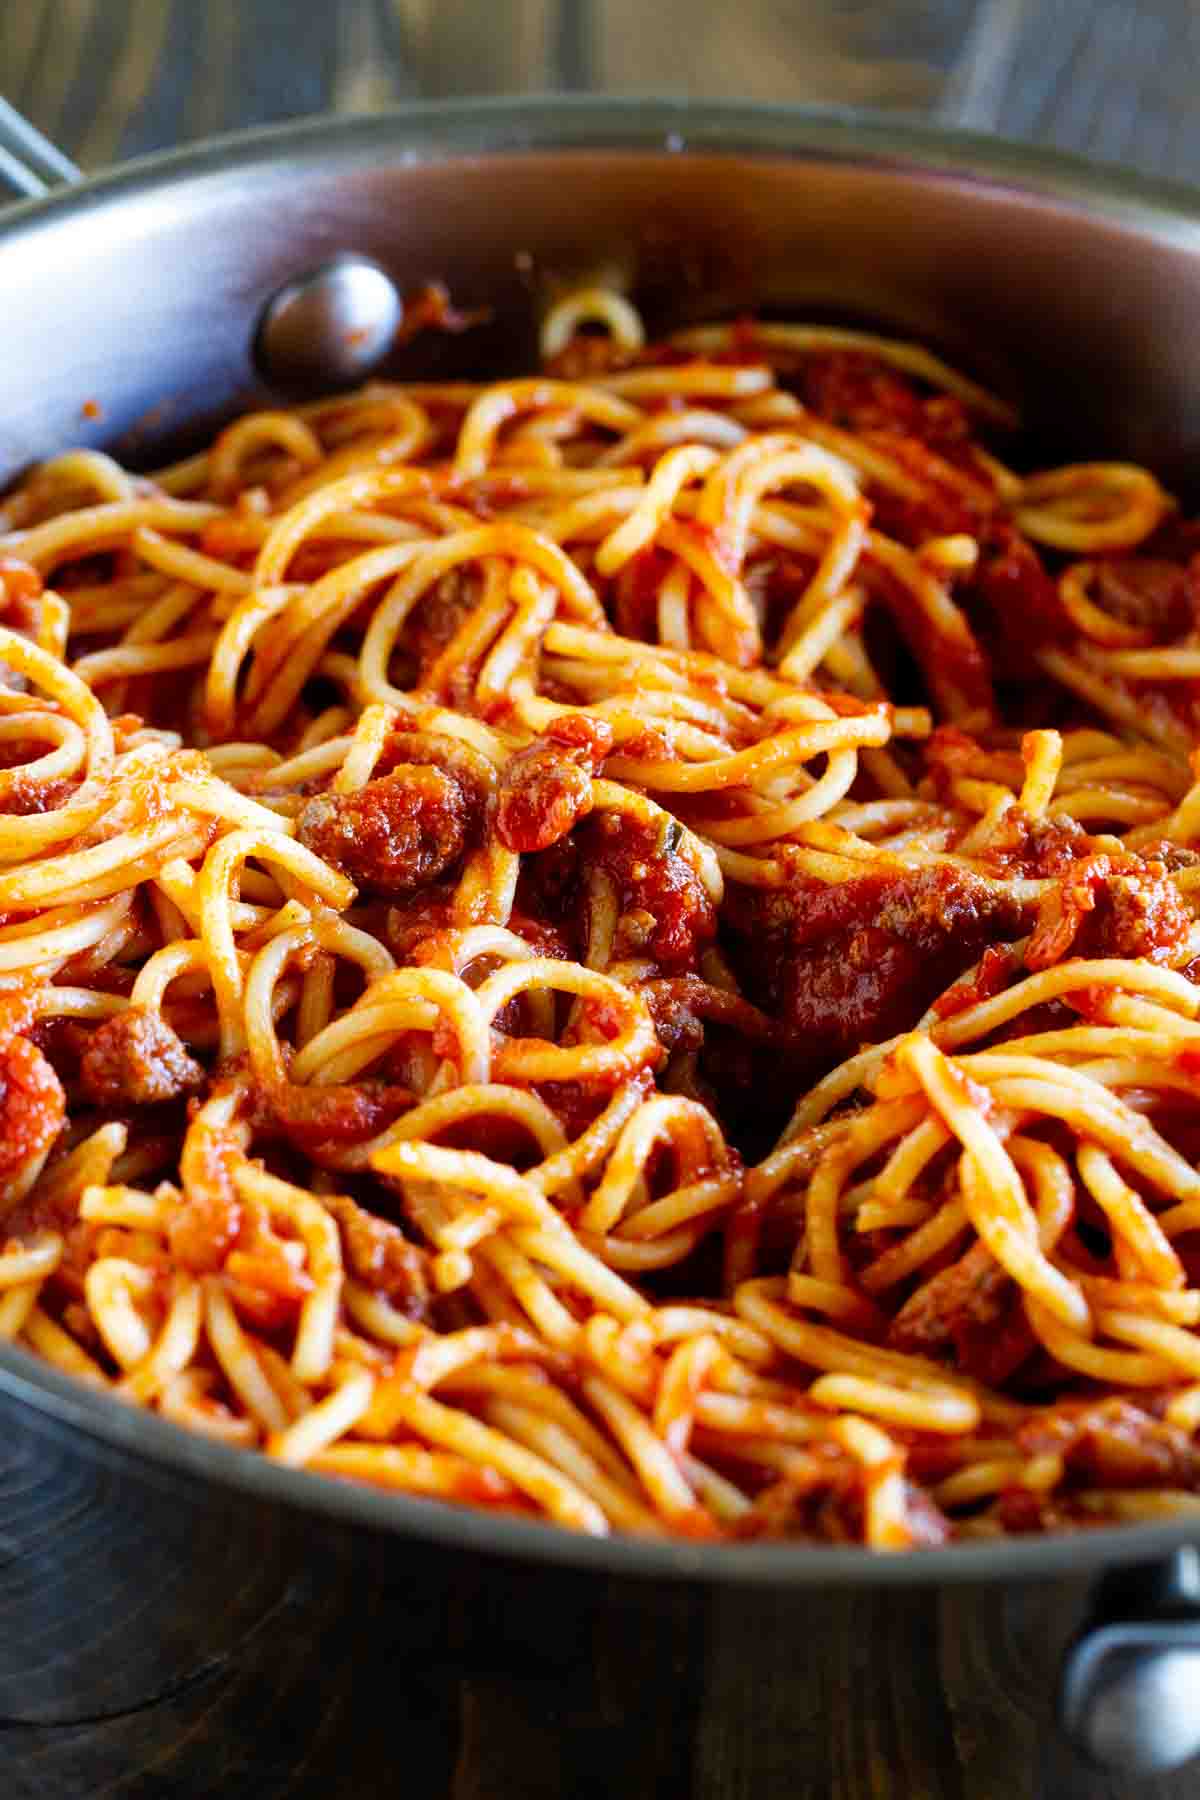 Spaghetti with meat sauce in a pan.